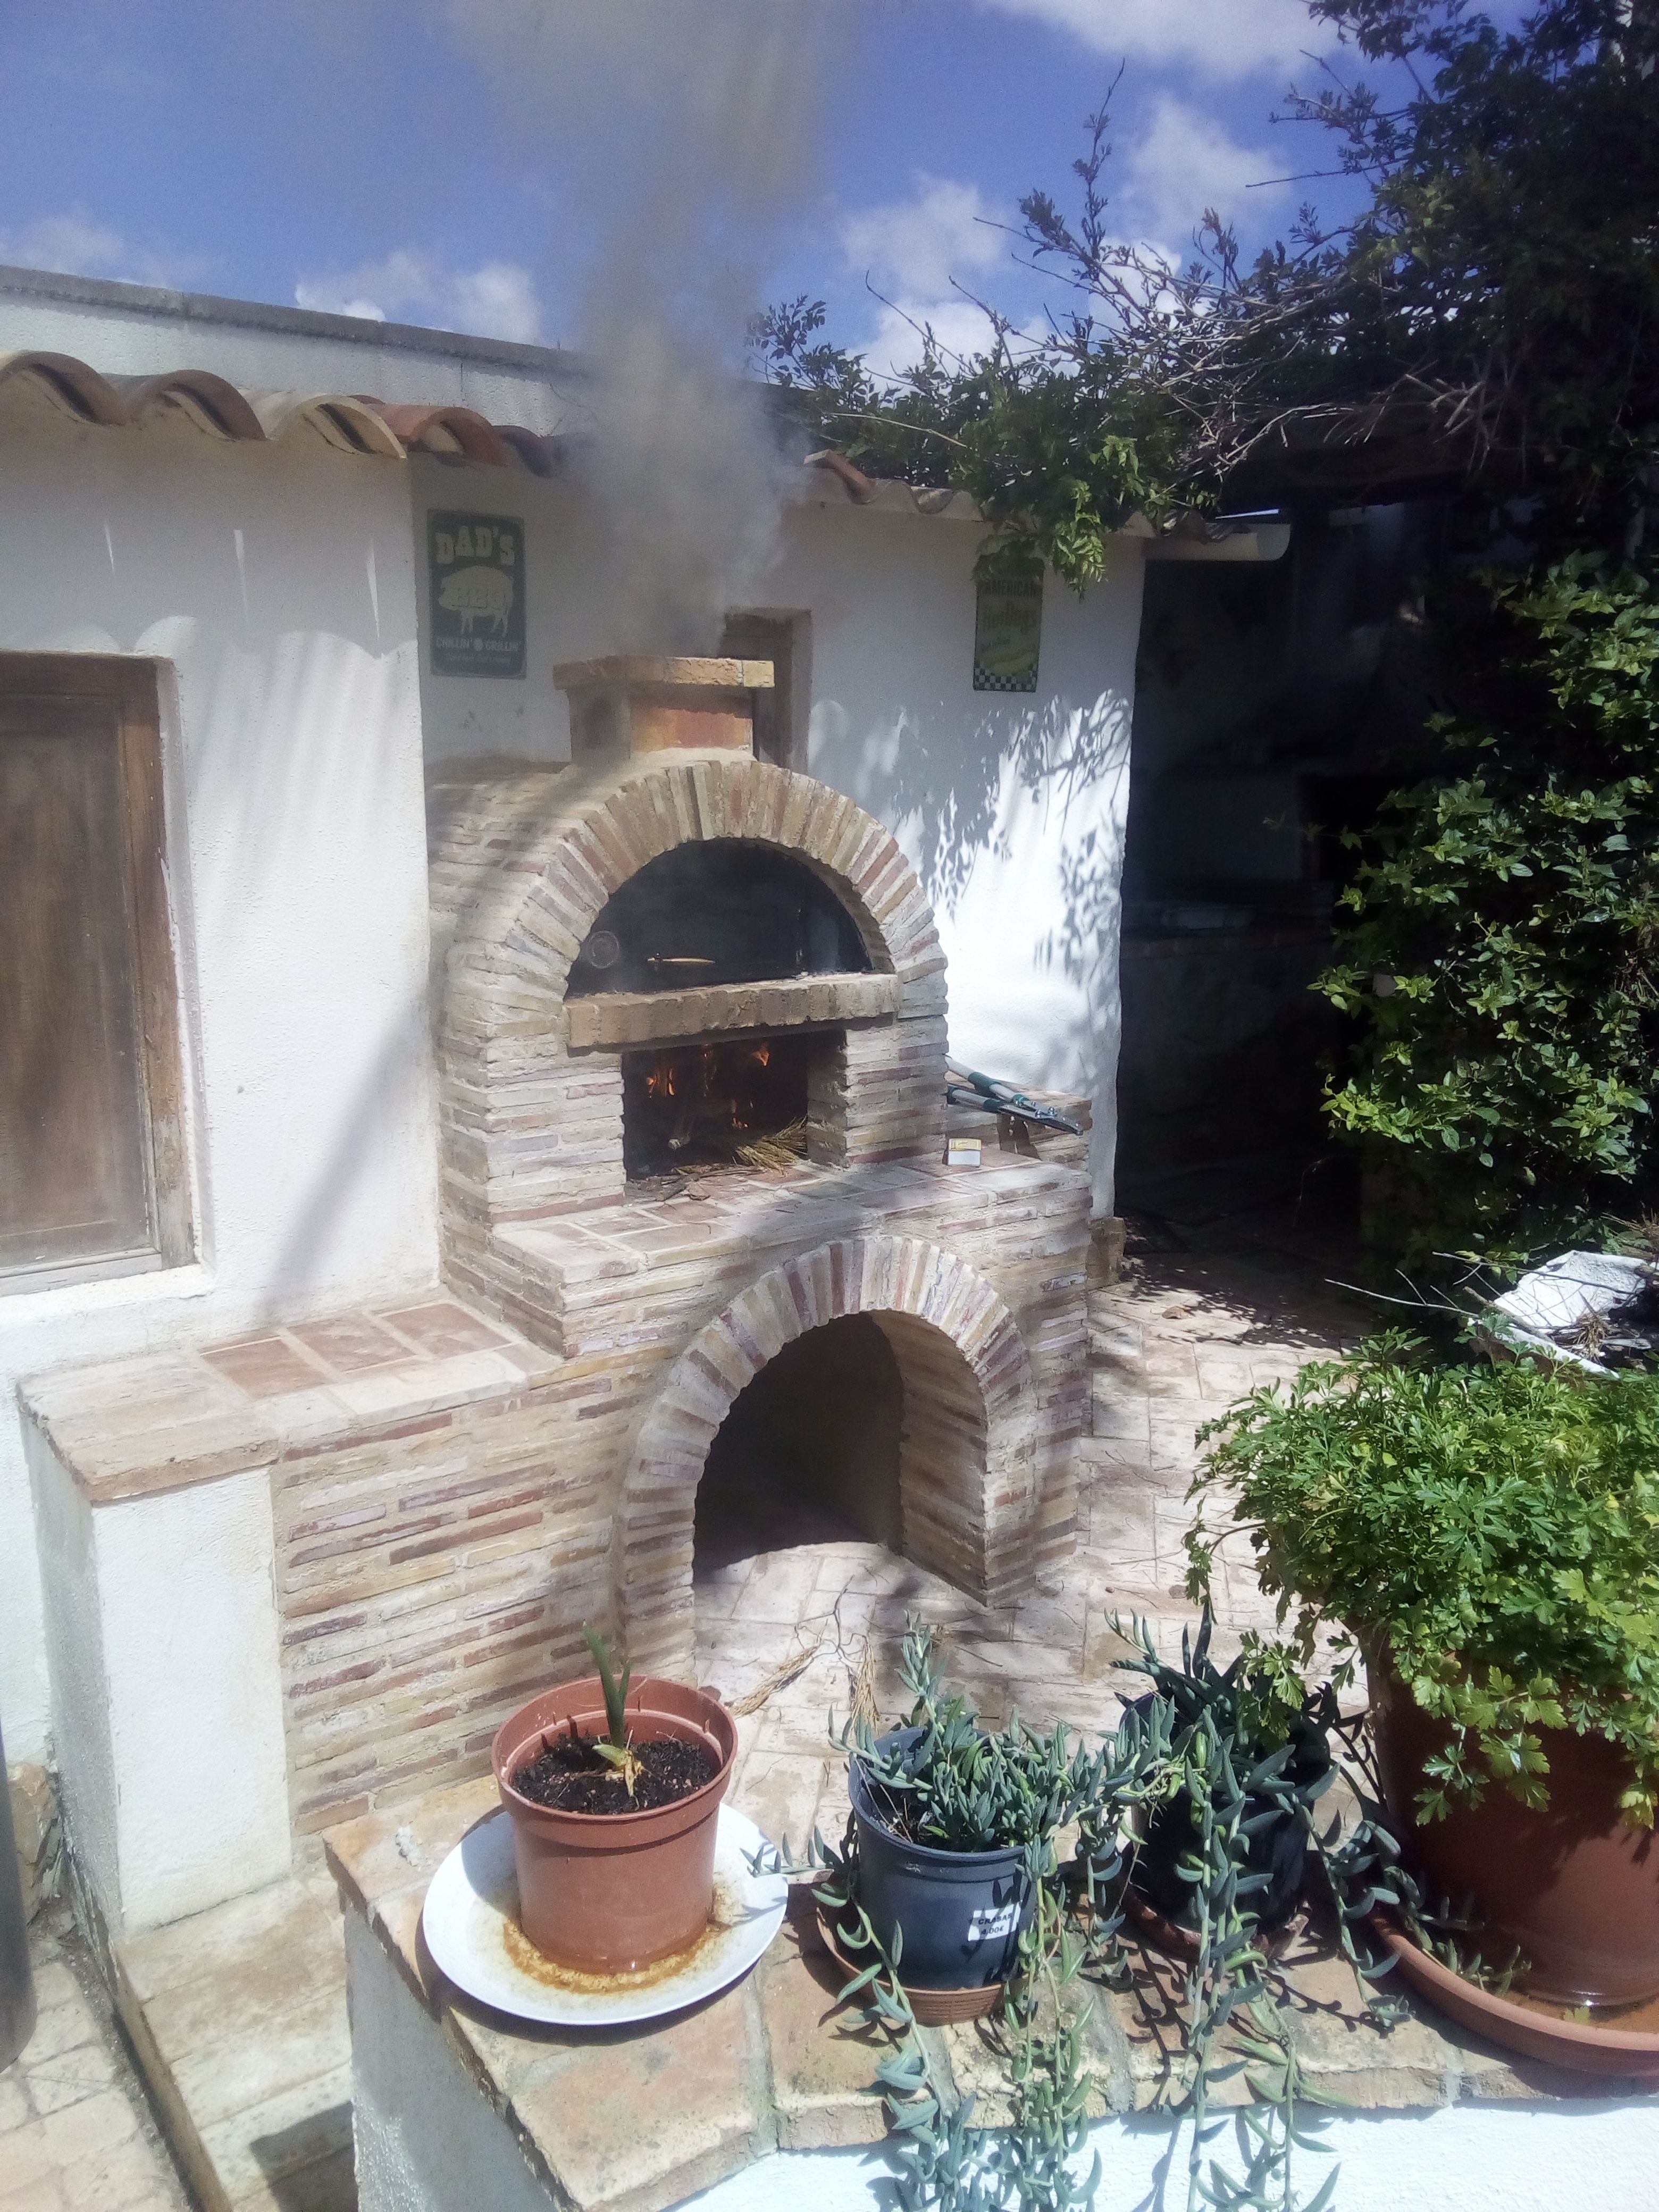 Experience a Little of Rome With a Backyard Pizza Oven